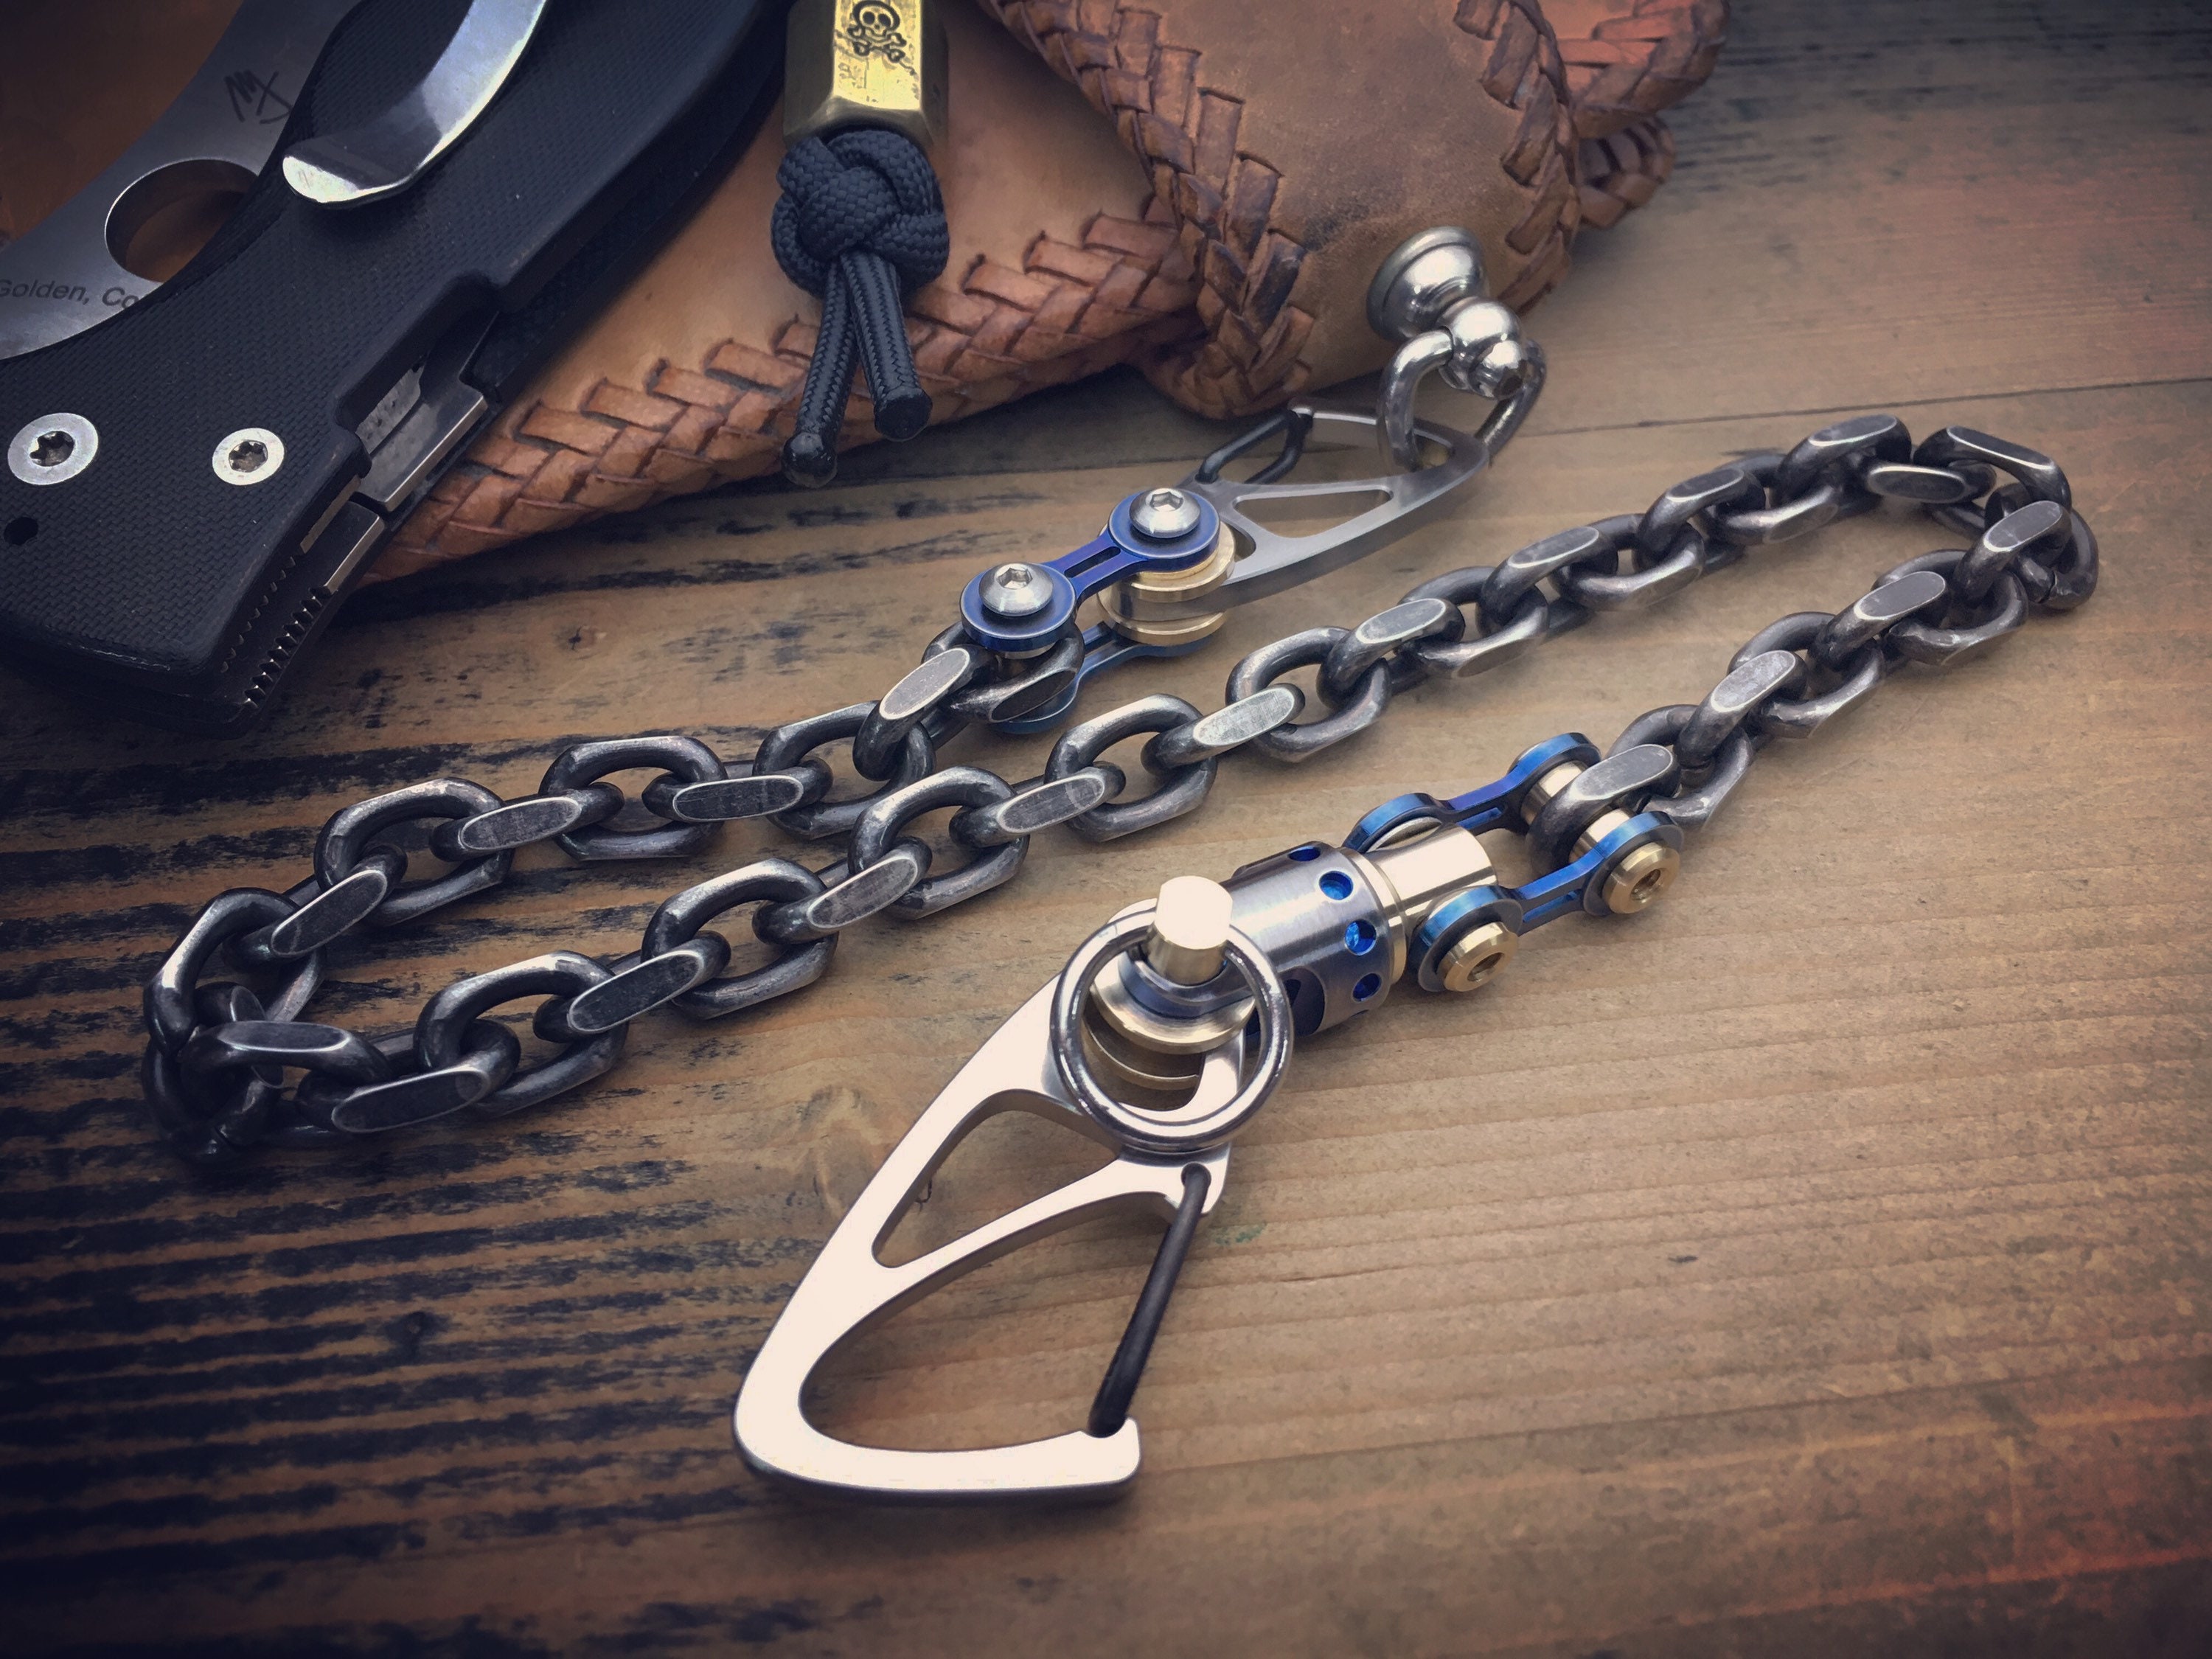 The Crane Operator - Mix-Aged Blue / Wallet boat chain with one Swivel